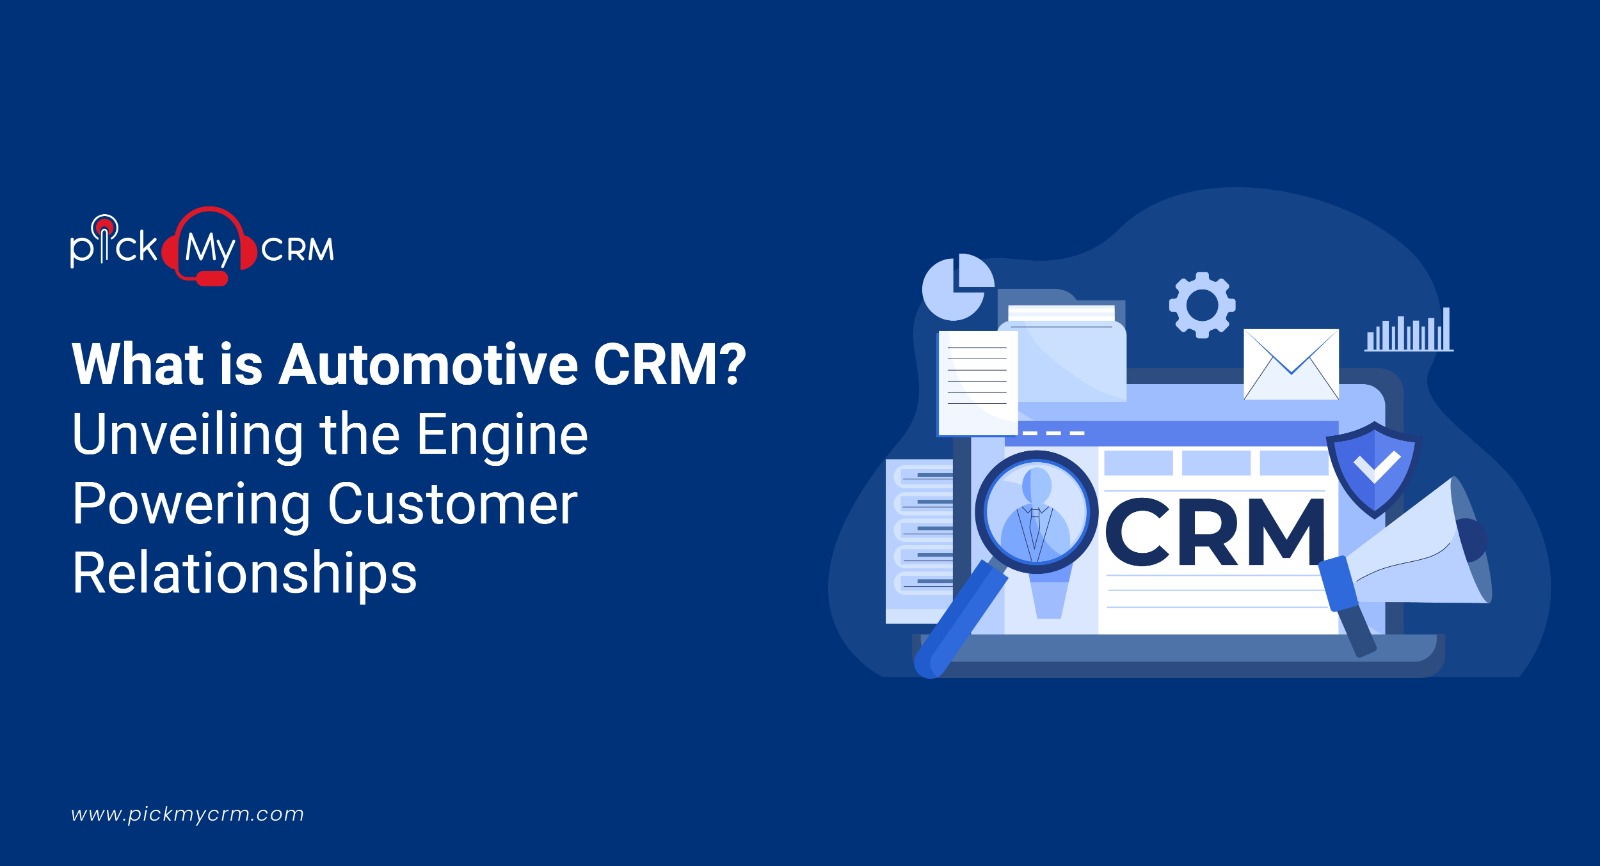 What is Automotive CRM? Unveiling the Engine Powering Customer Relationships